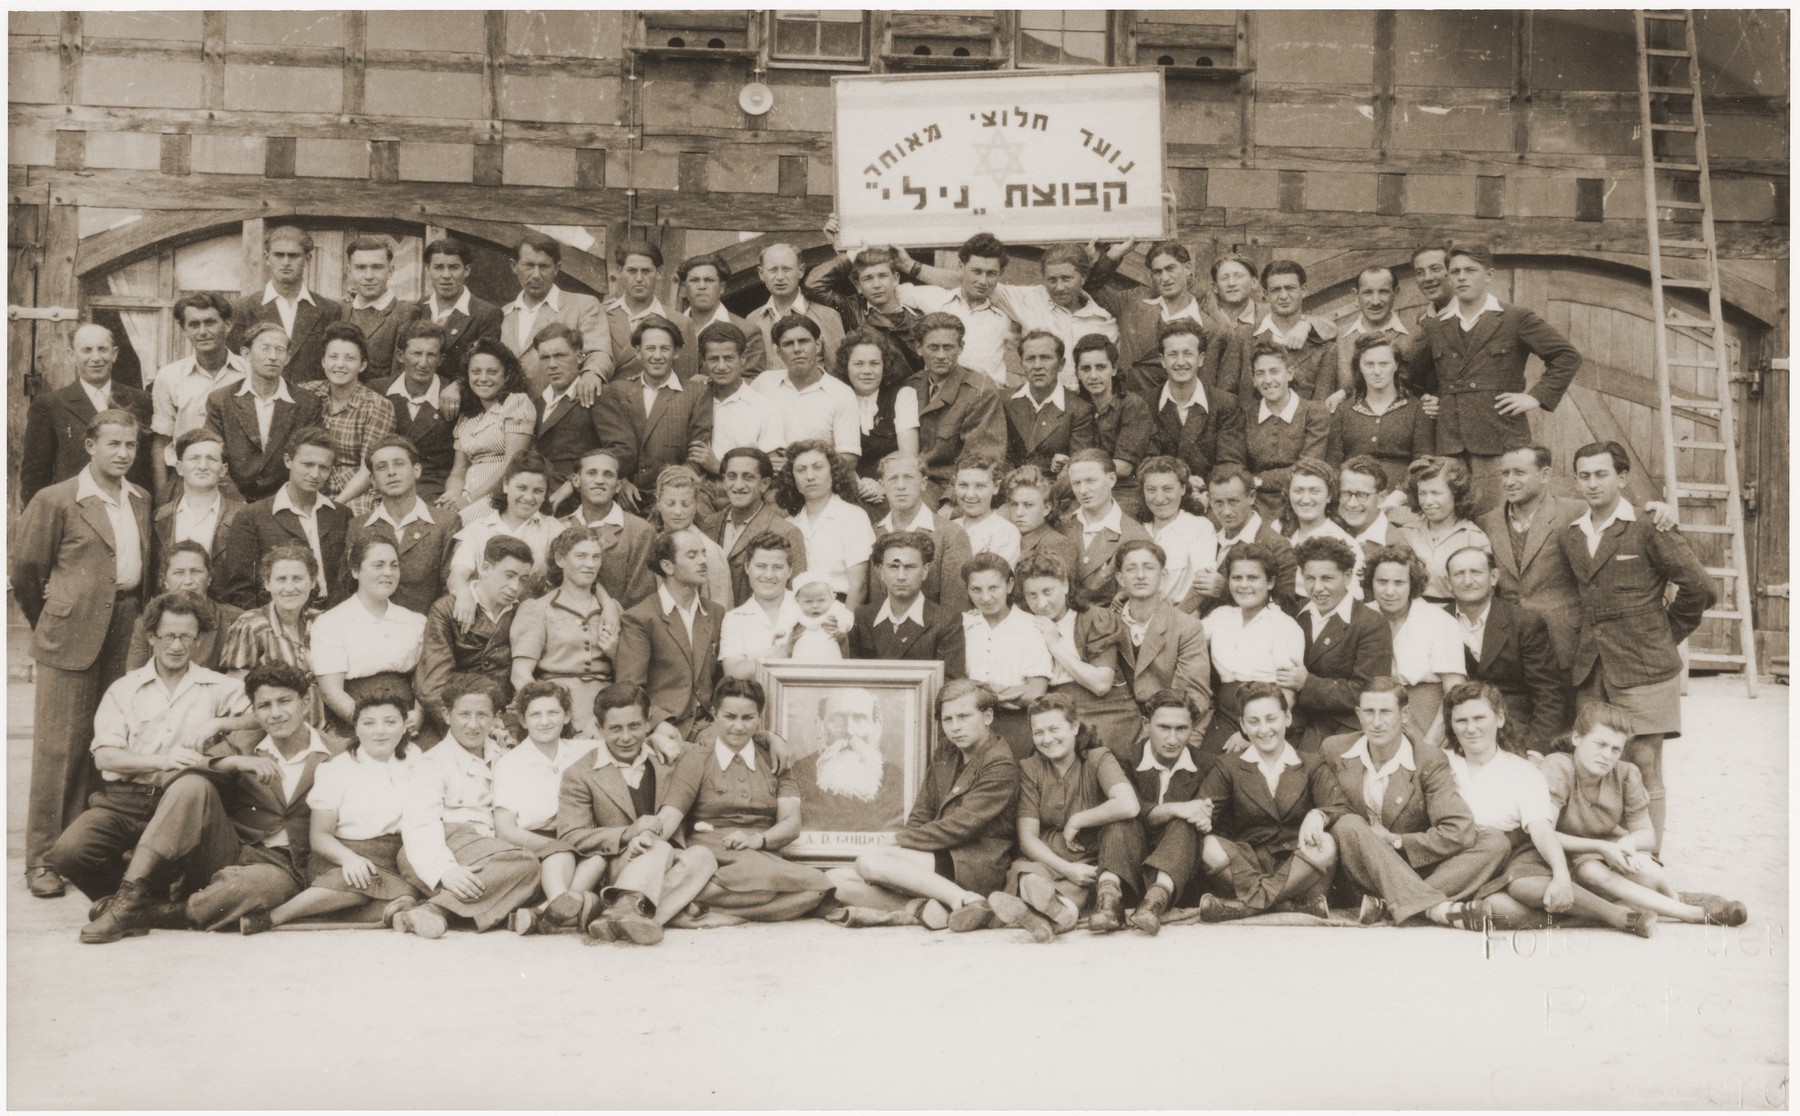 Group portrait of members of the Kibbutz Nili hachshara (Zionist collective) in Pleikershof, Germany

Those in the front row hold a protrait of labor Zionist idealogue A. D. Gordon.  Sitting directly behind the portrait are Noach and Sara (Feldberg) Miedzinski with their infant daughter Nili Ruchana.   Yakov Podolak appears in the second row from the top, eighth 
from the left., and Aryeh Leib Srebrnik is in the second row, far right.